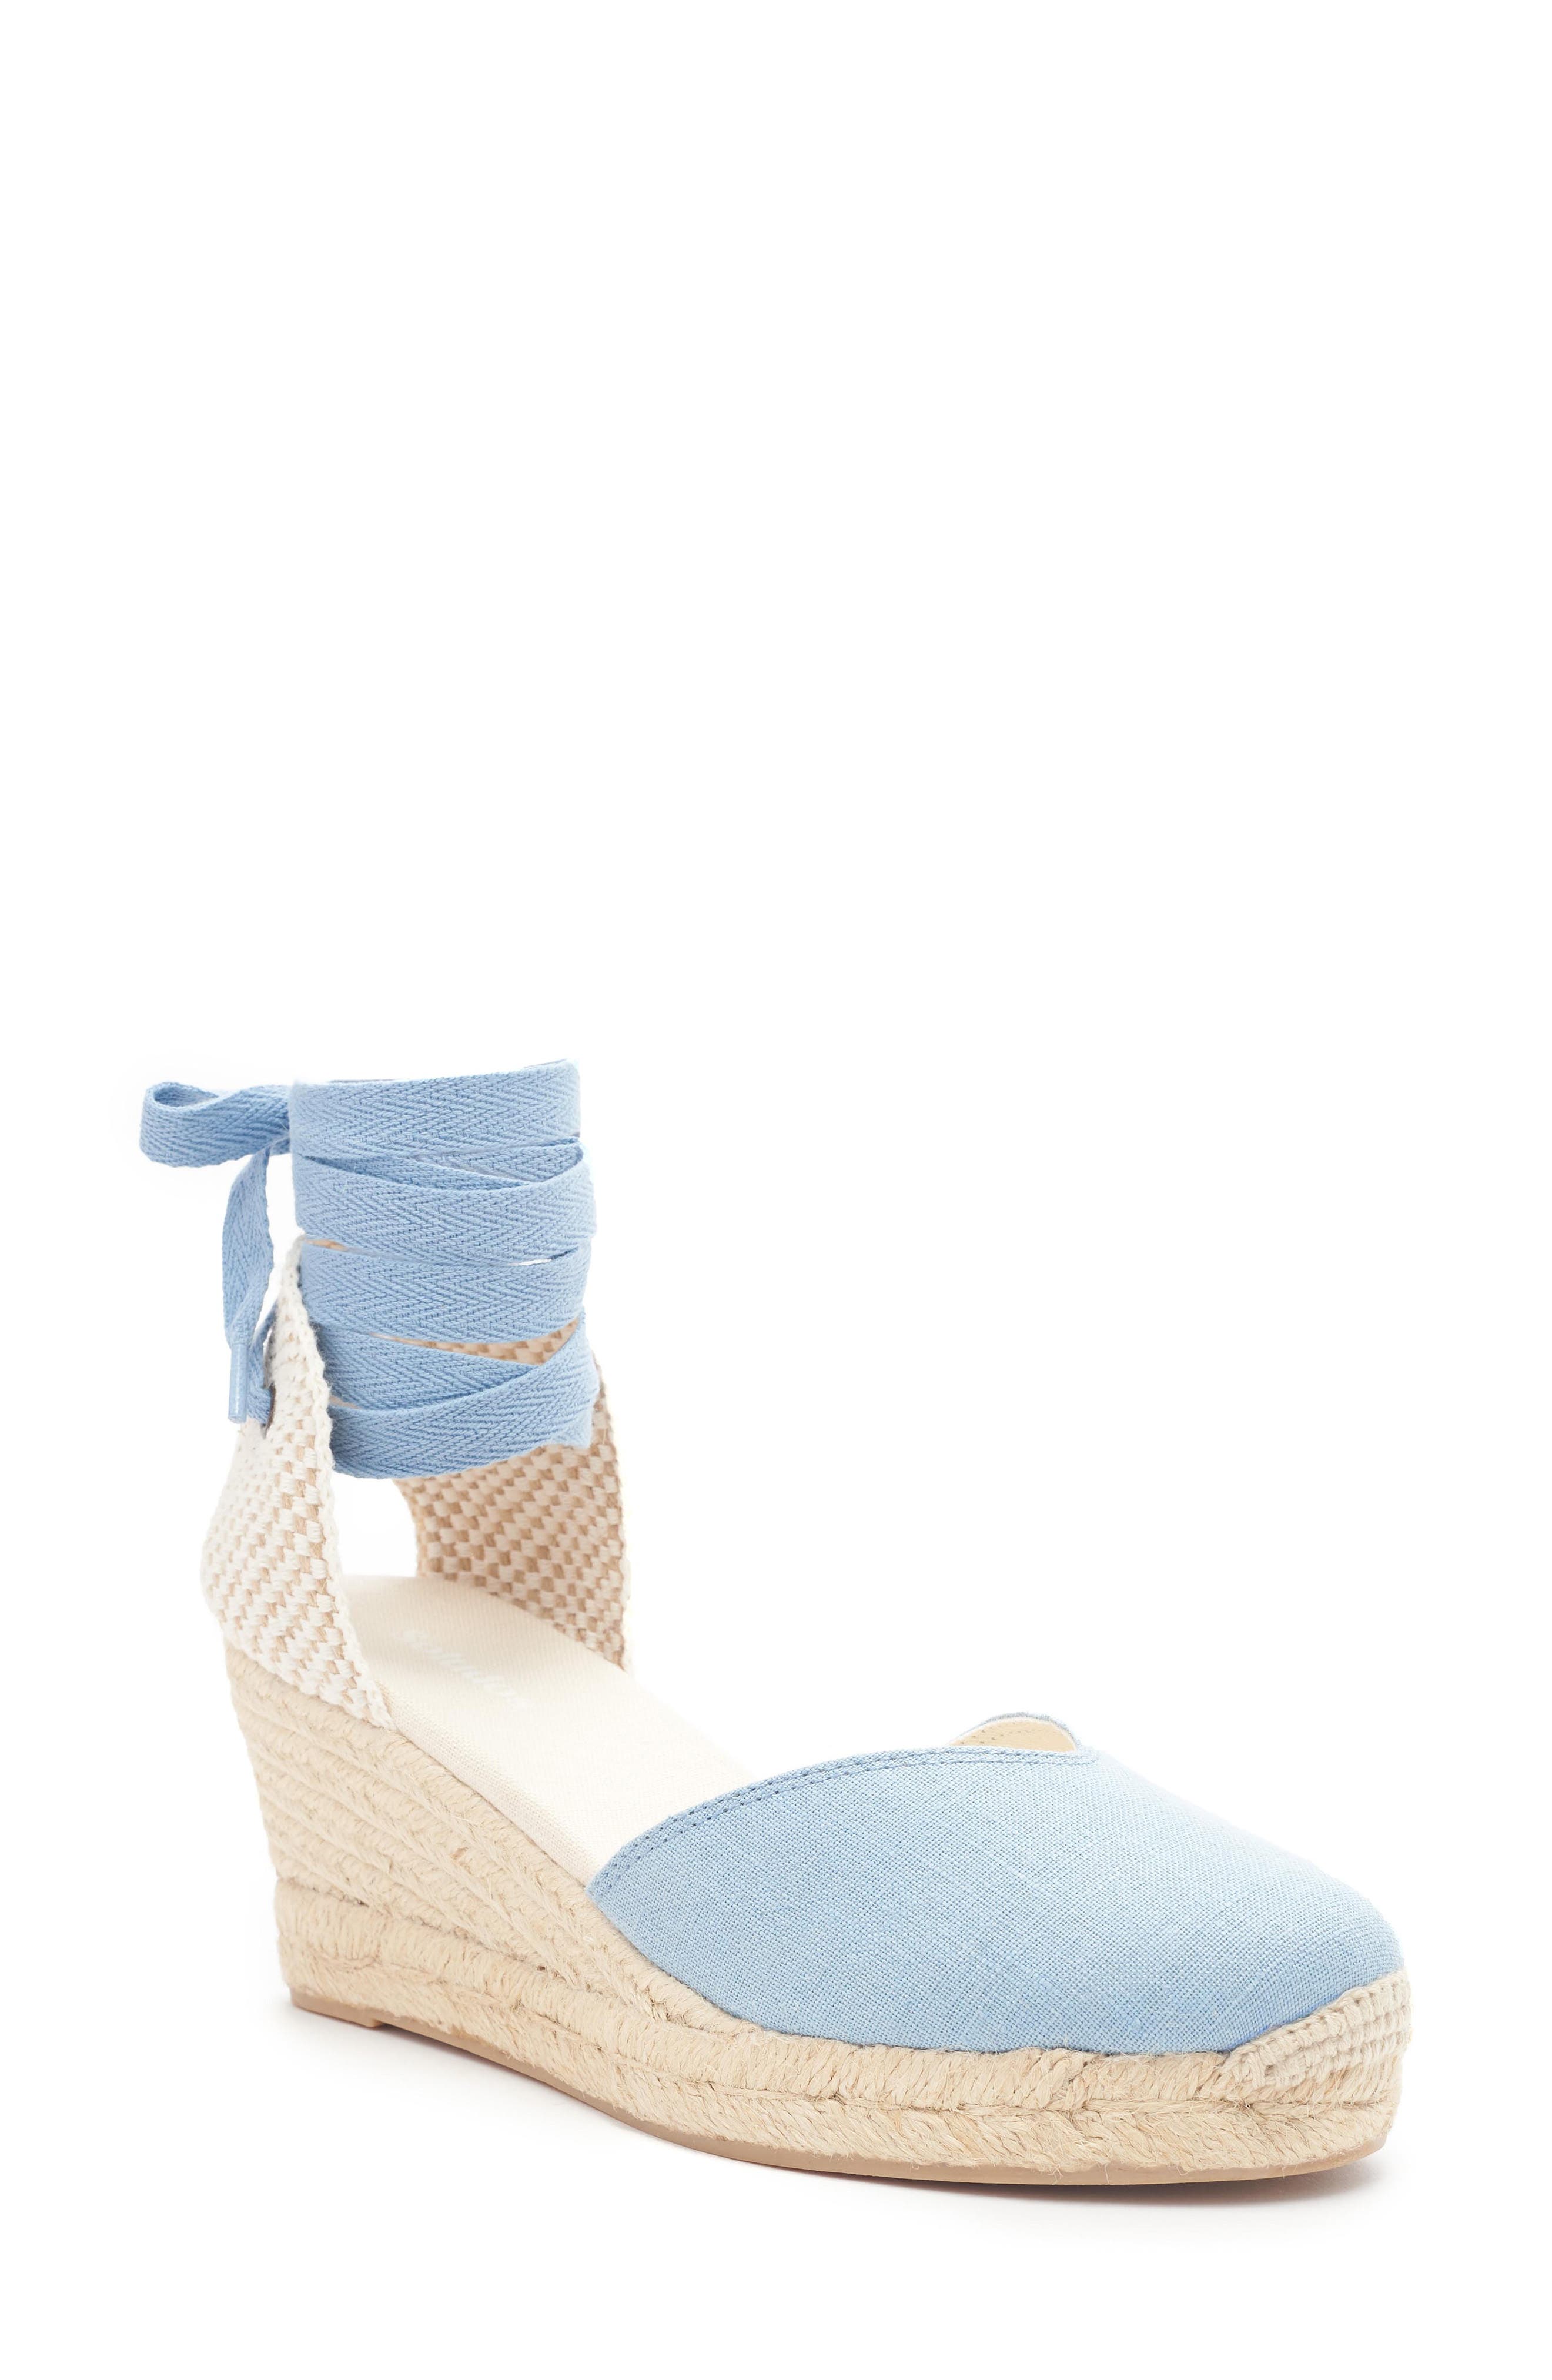 Replay Espadrille Sandals blue-natural white casual look Shoes Sandals Espadrille Sandals 